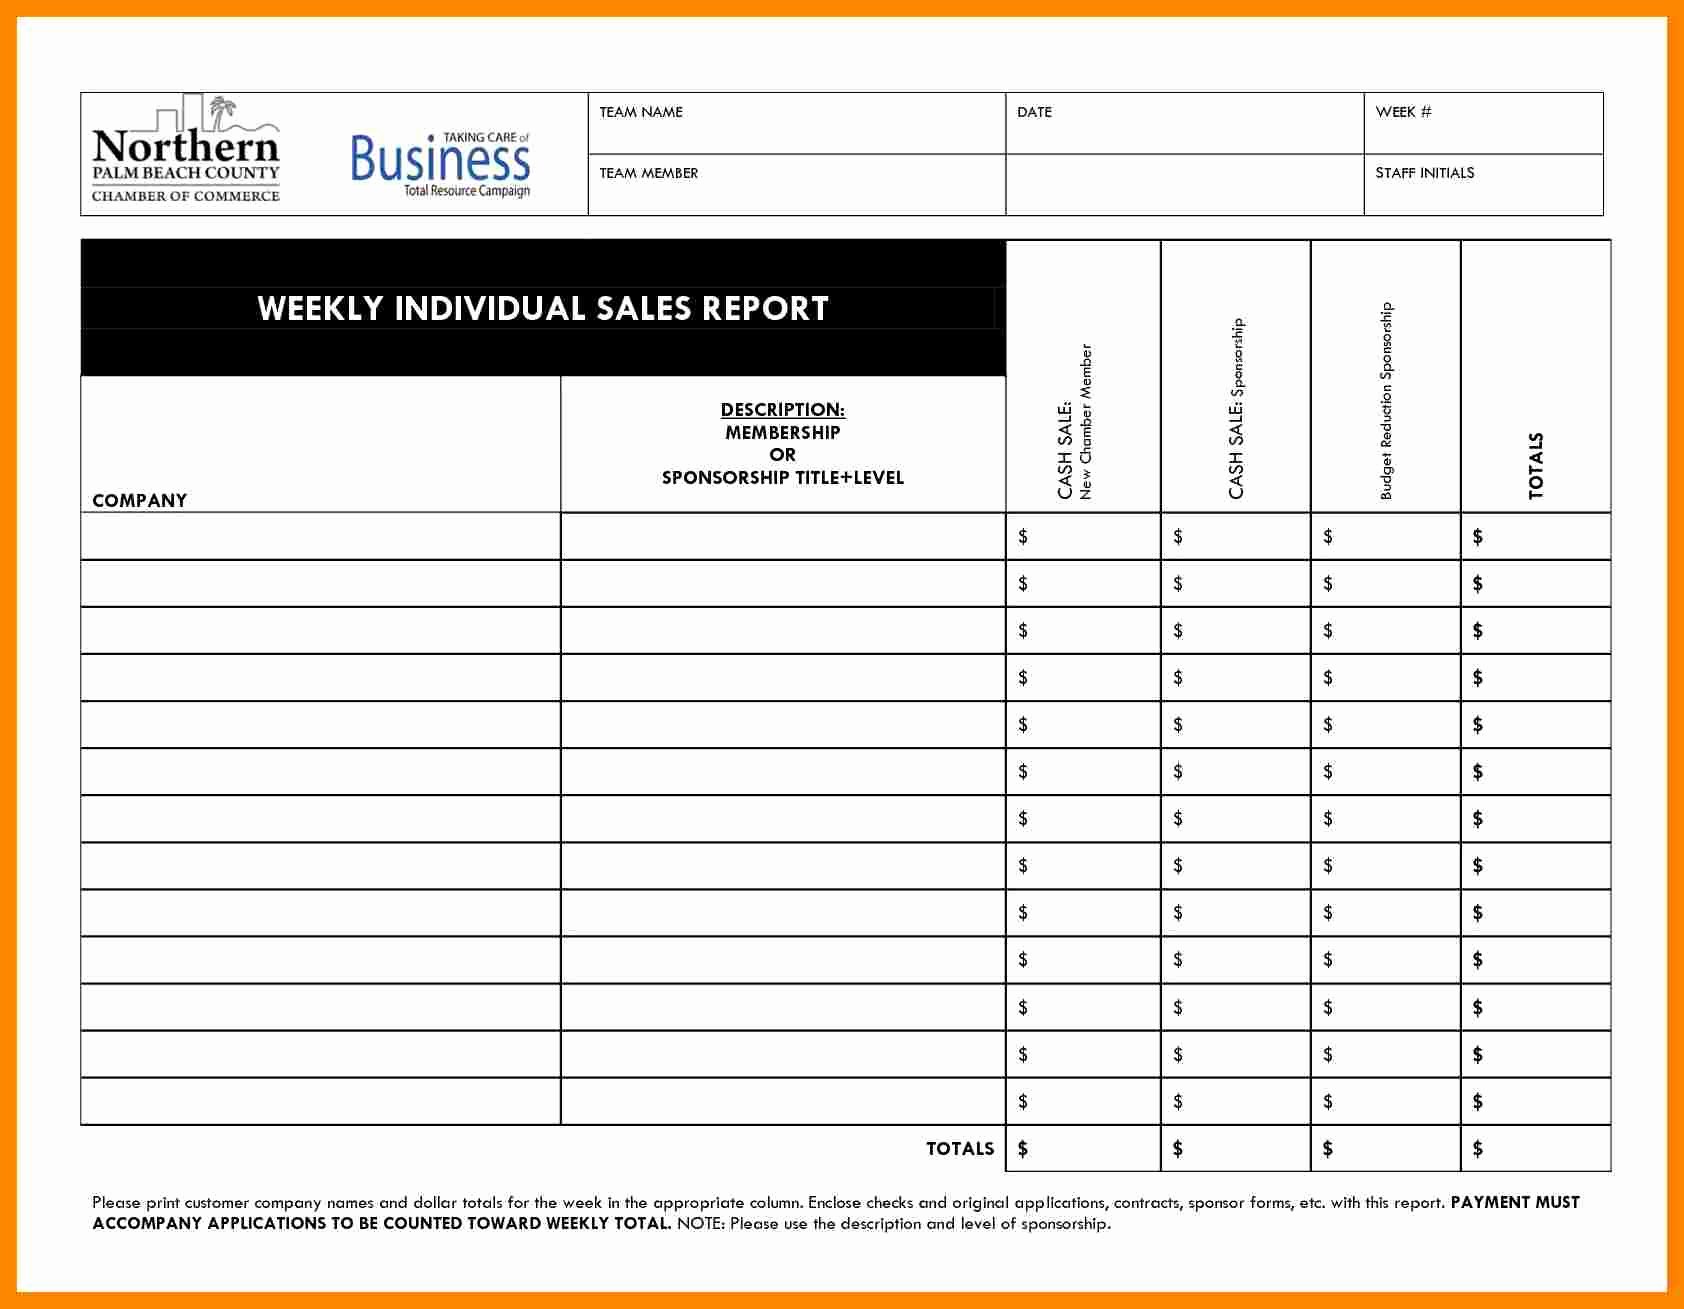 Security Officer Daily Activity Report Sample Luxury Weekly Activity Report Template Excel Free Daily Sales